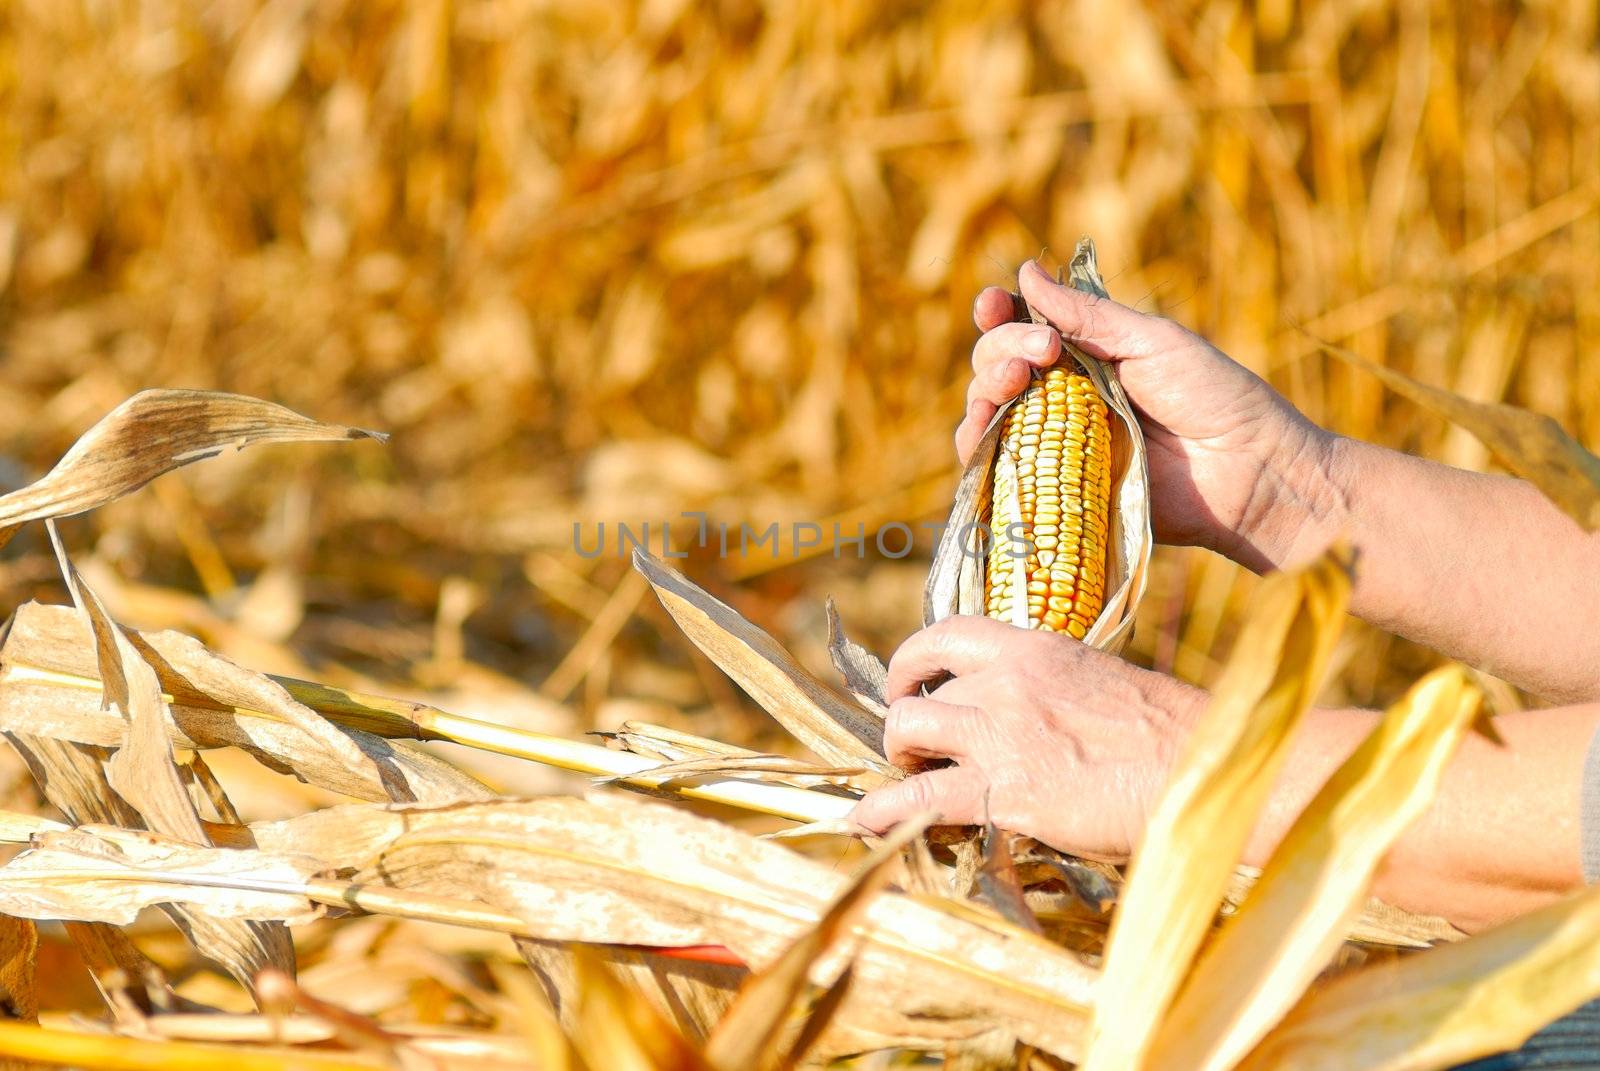 peasant is harvesting a corncobs, manual labour 